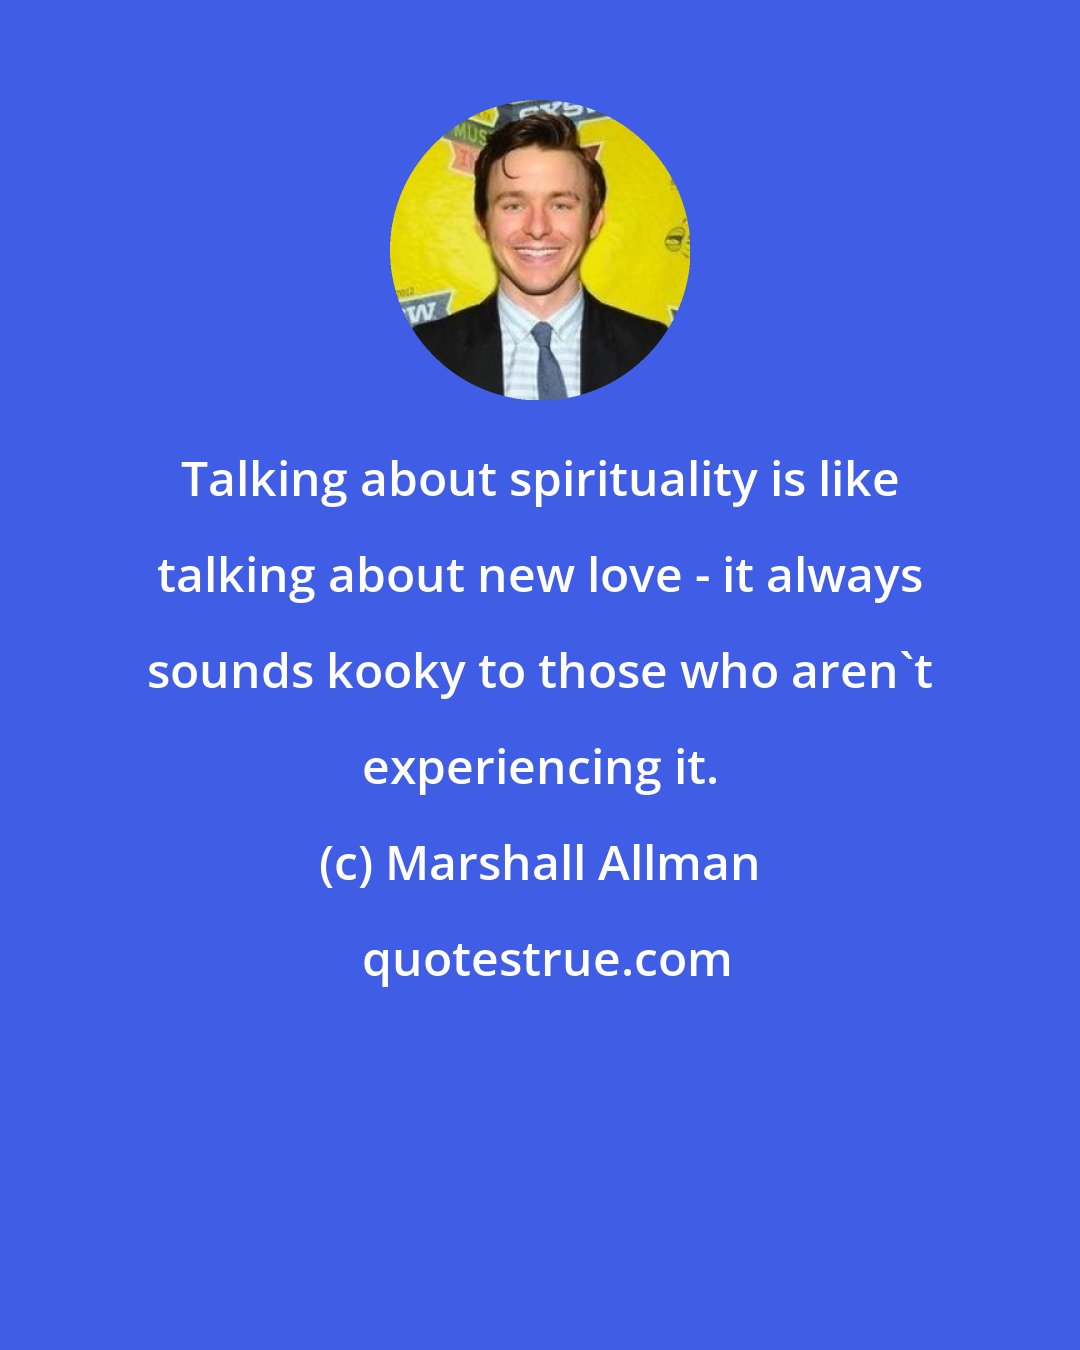 Marshall Allman: Talking about spirituality is like talking about new love - it always sounds kooky to those who aren't experiencing it.